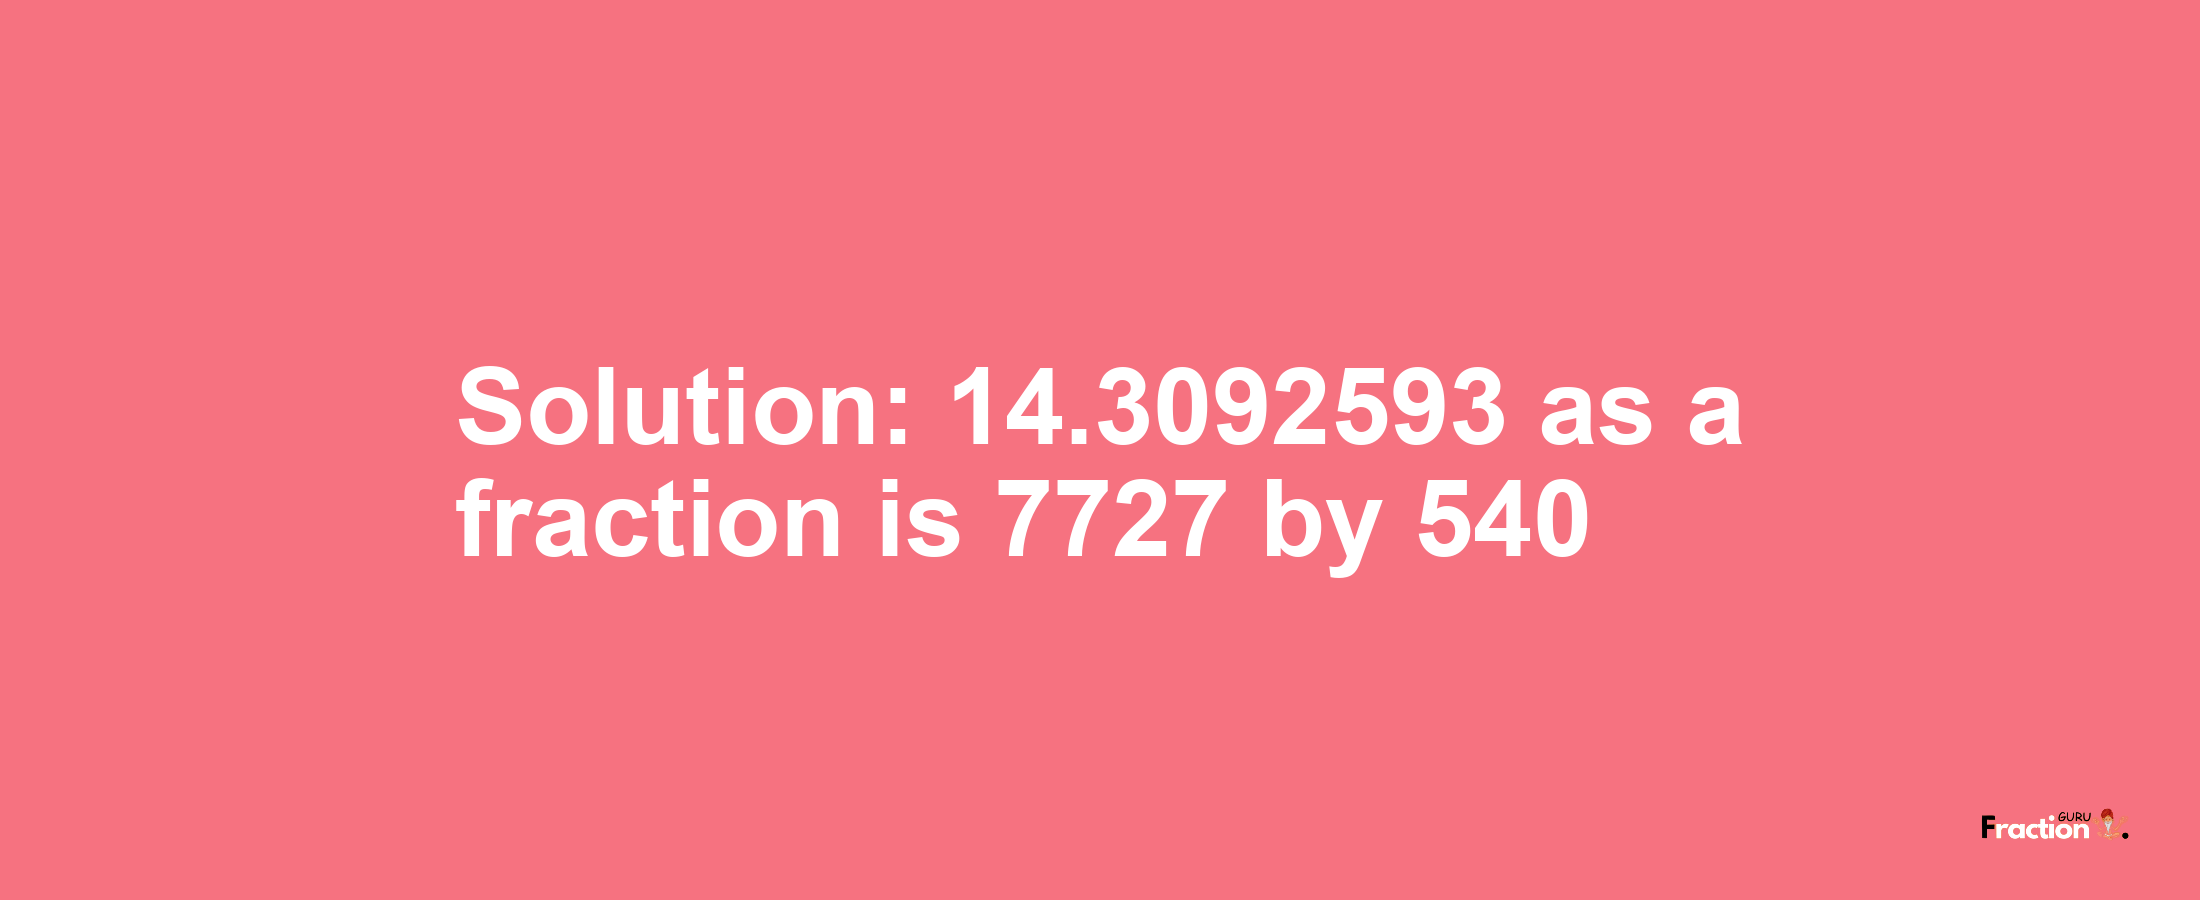 Solution:14.3092593 as a fraction is 7727/540